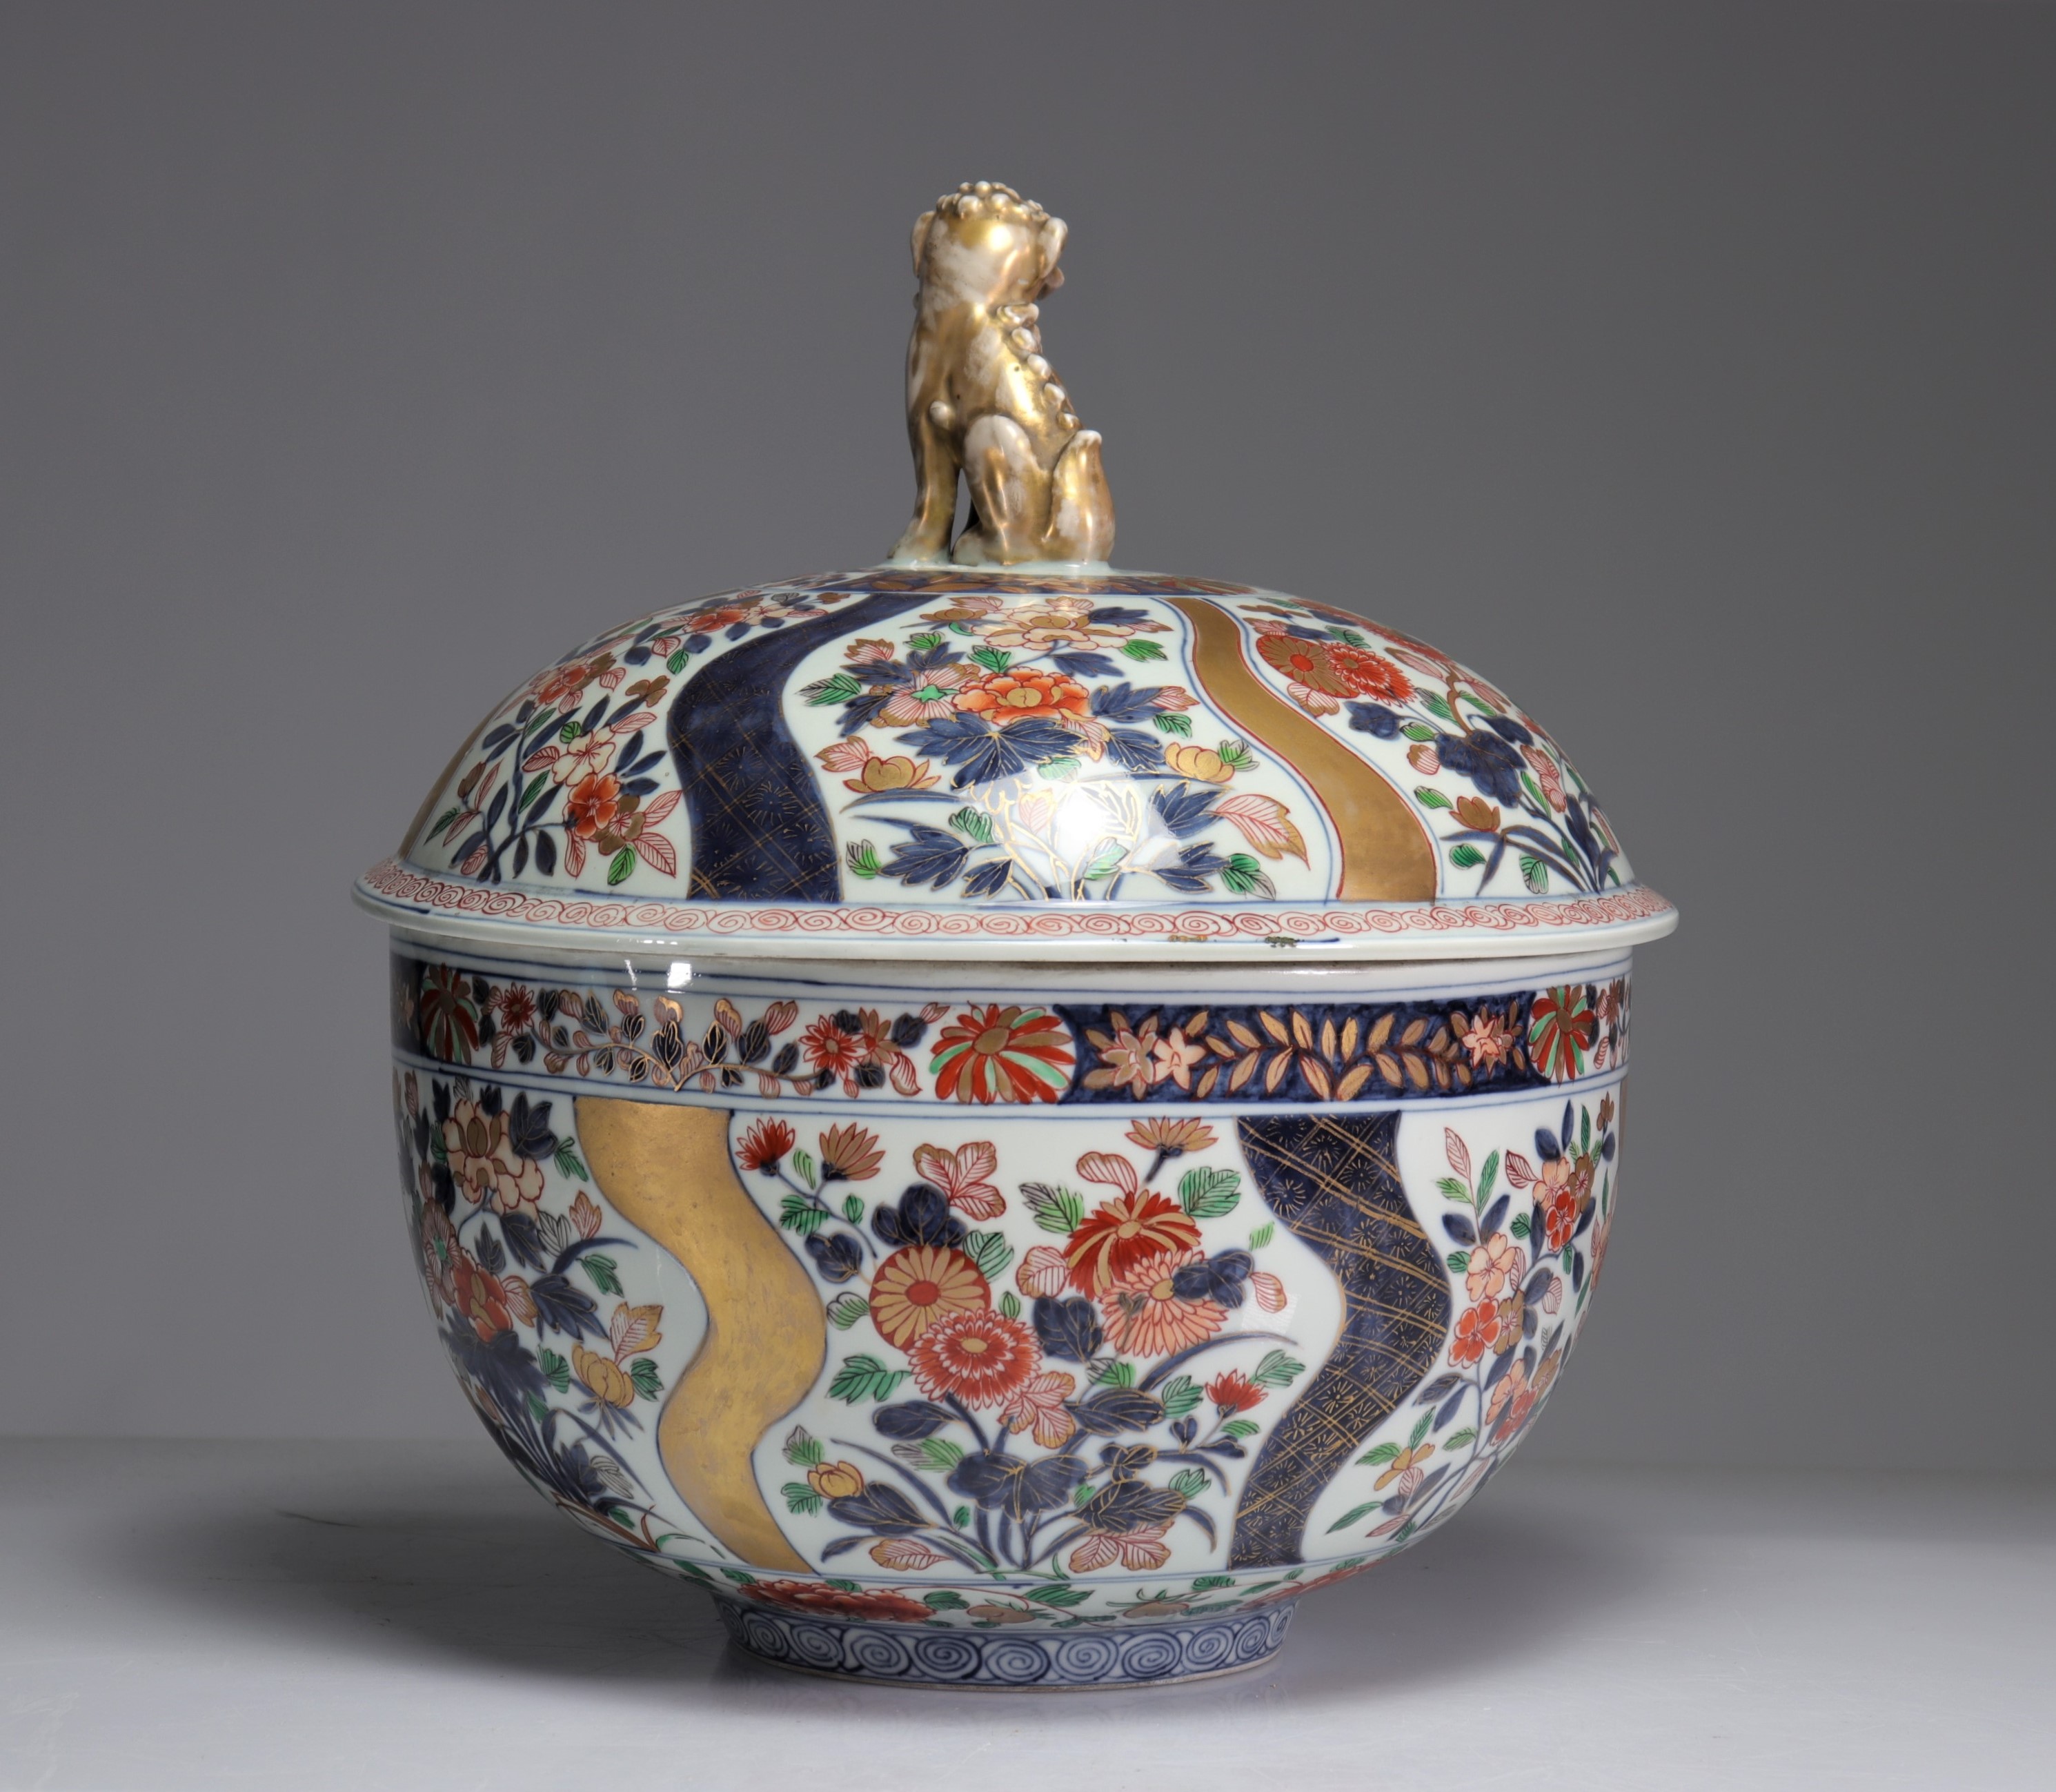 Imposing covered bowl in 18th century Japanese porcelain - Image 4 of 7